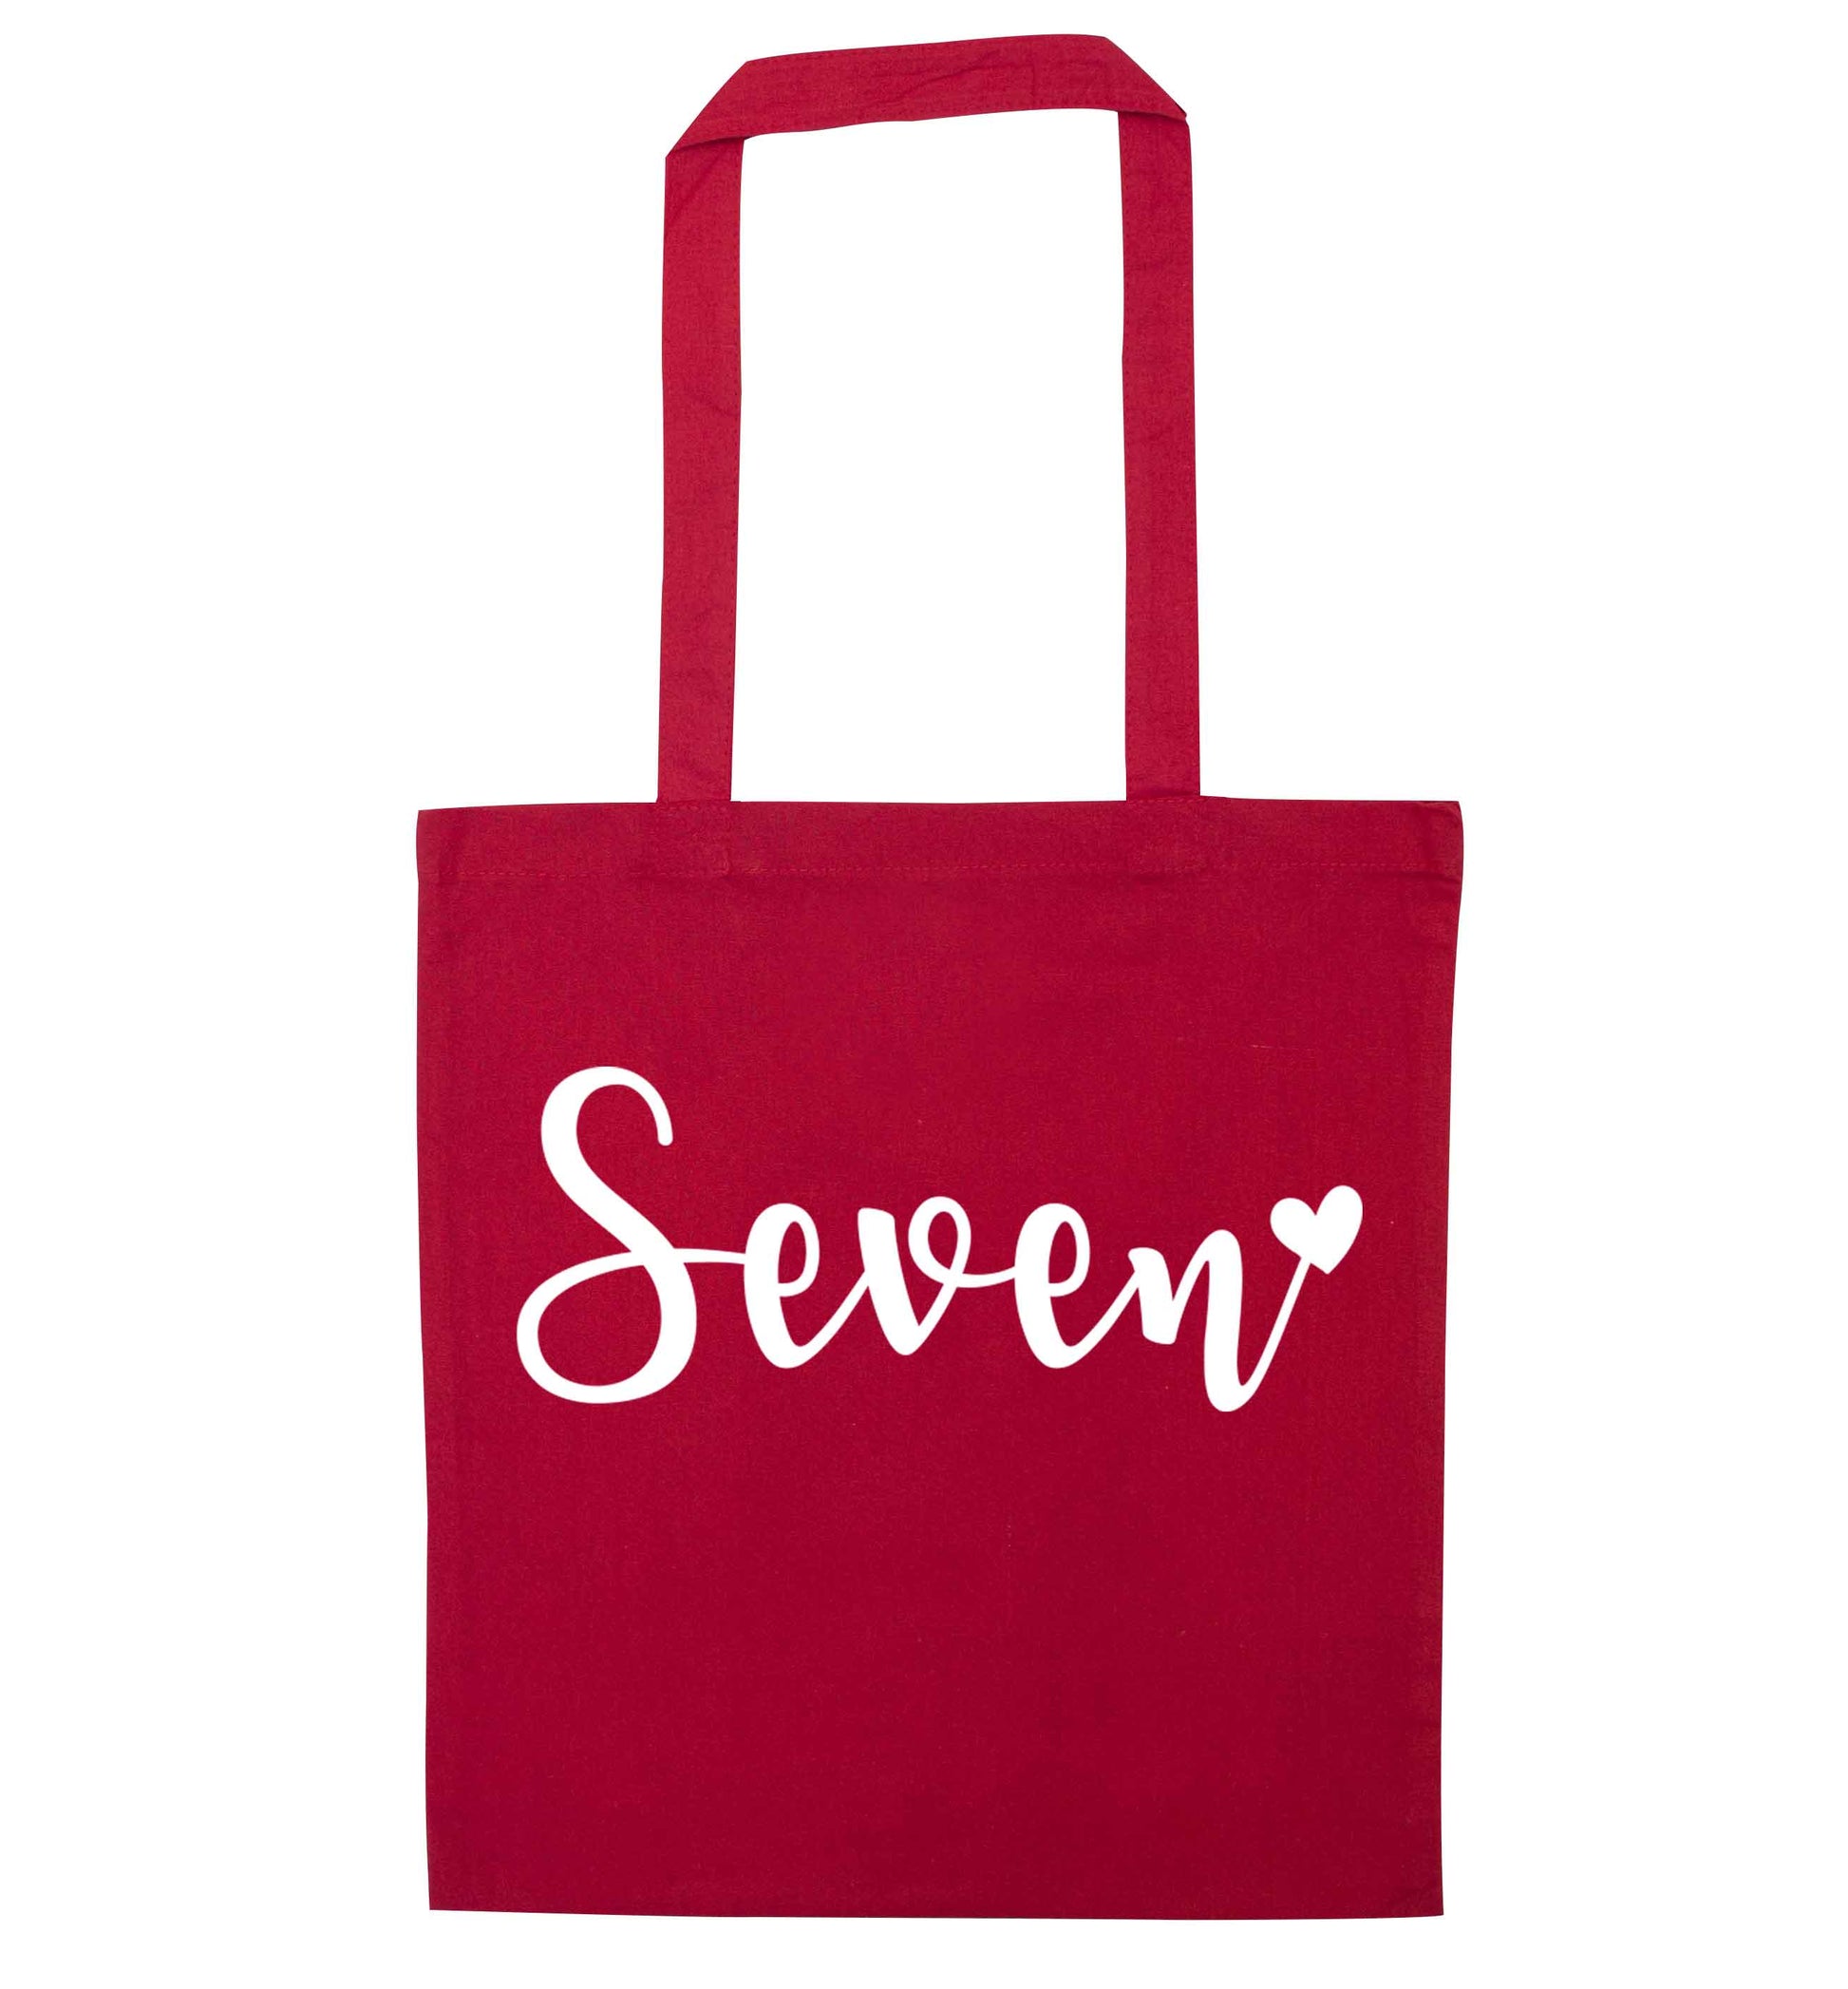 Seven and heart red tote bag